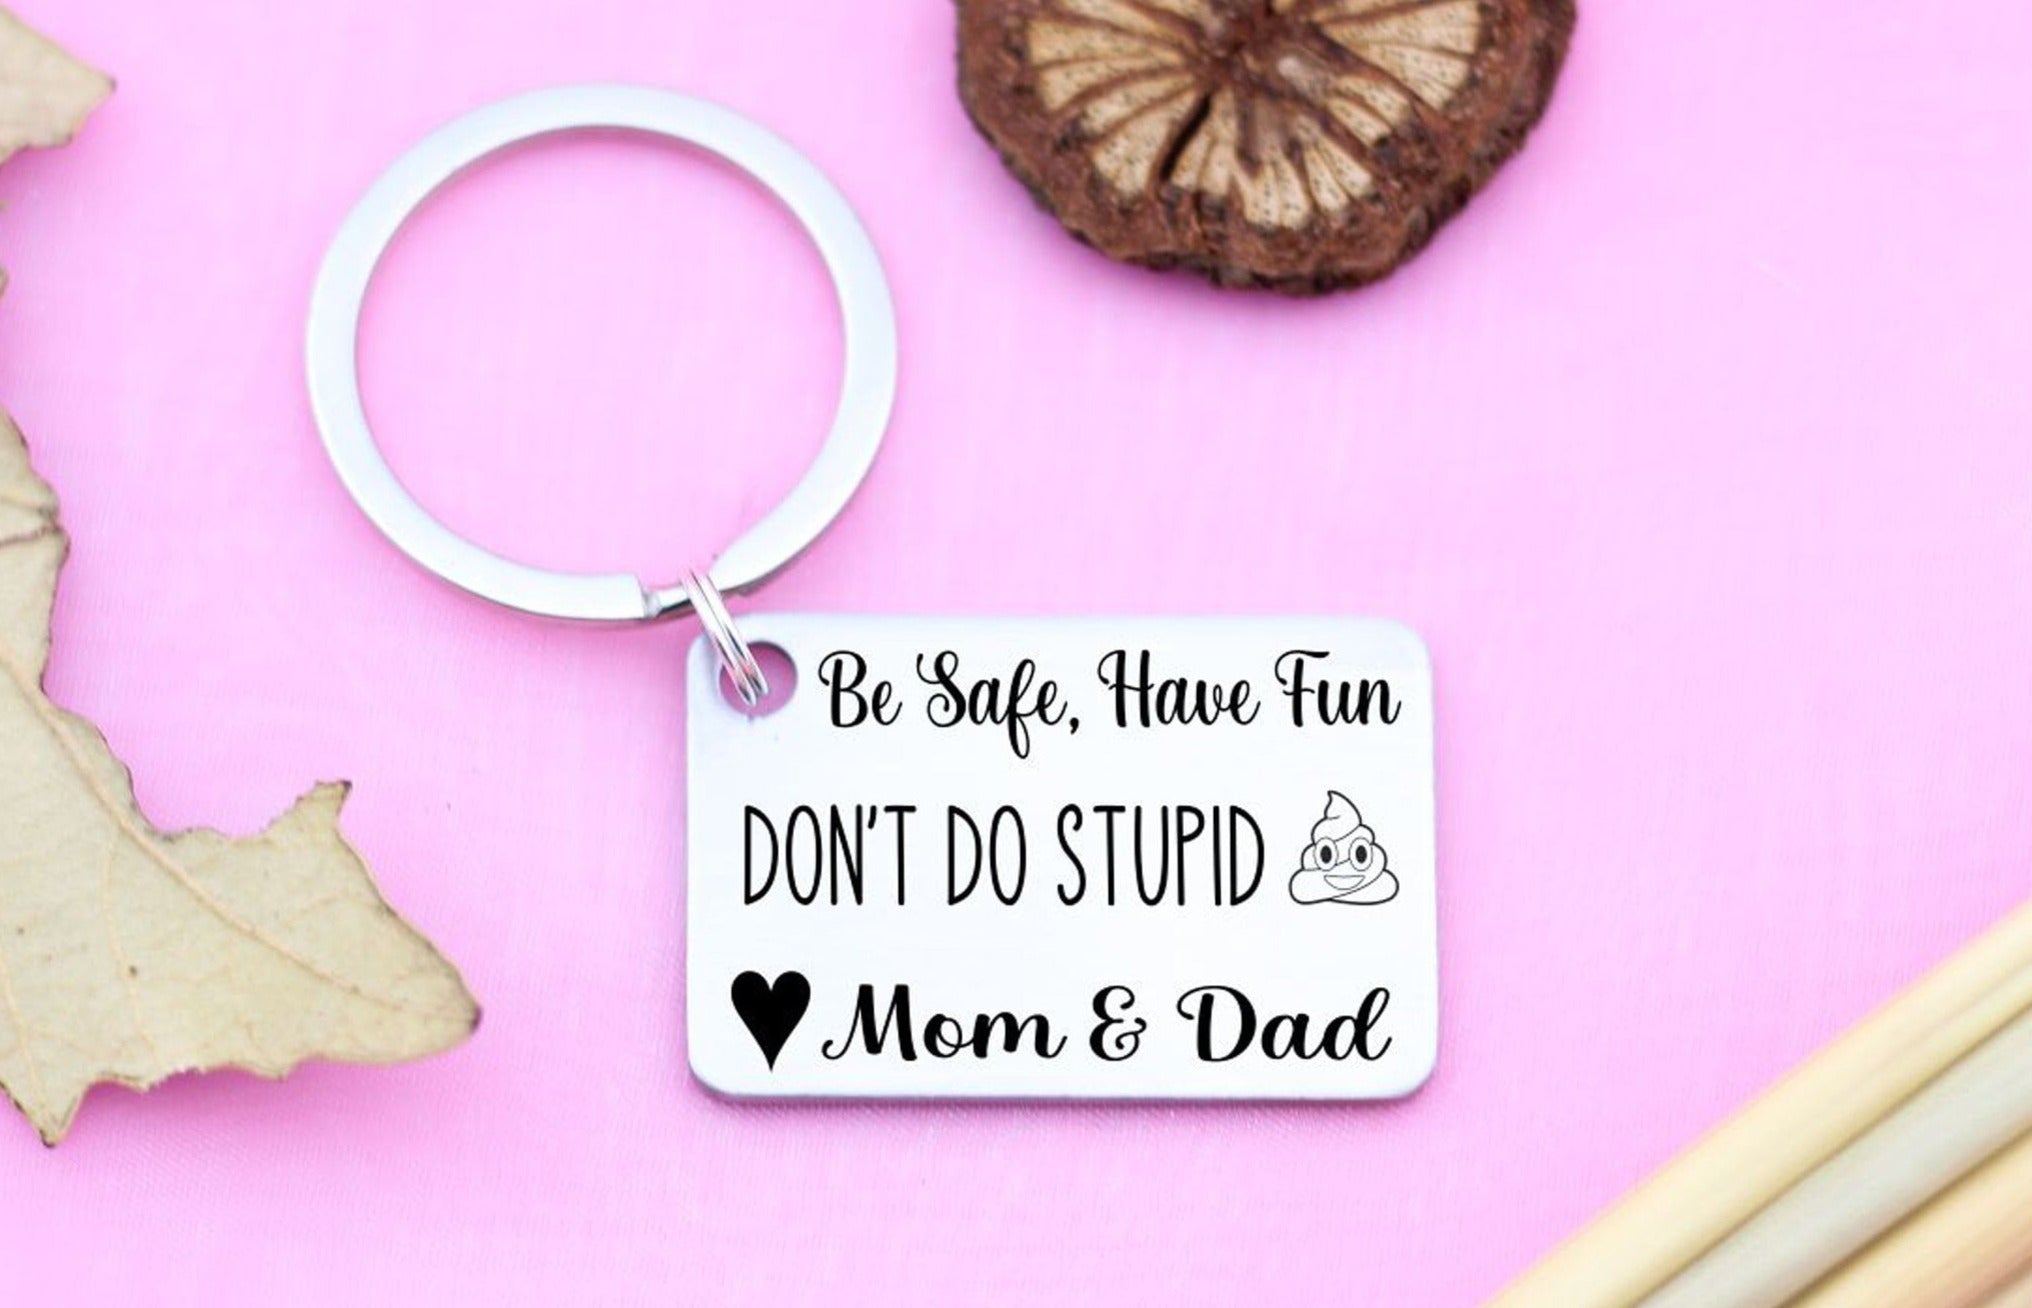 1pc Don't Do Stupid Shit Keychain From Mom Or Dad - Laser Engraved Key  Chain For New Driver, Funny Son Or Daughter Gift, Graduation Gift Idea